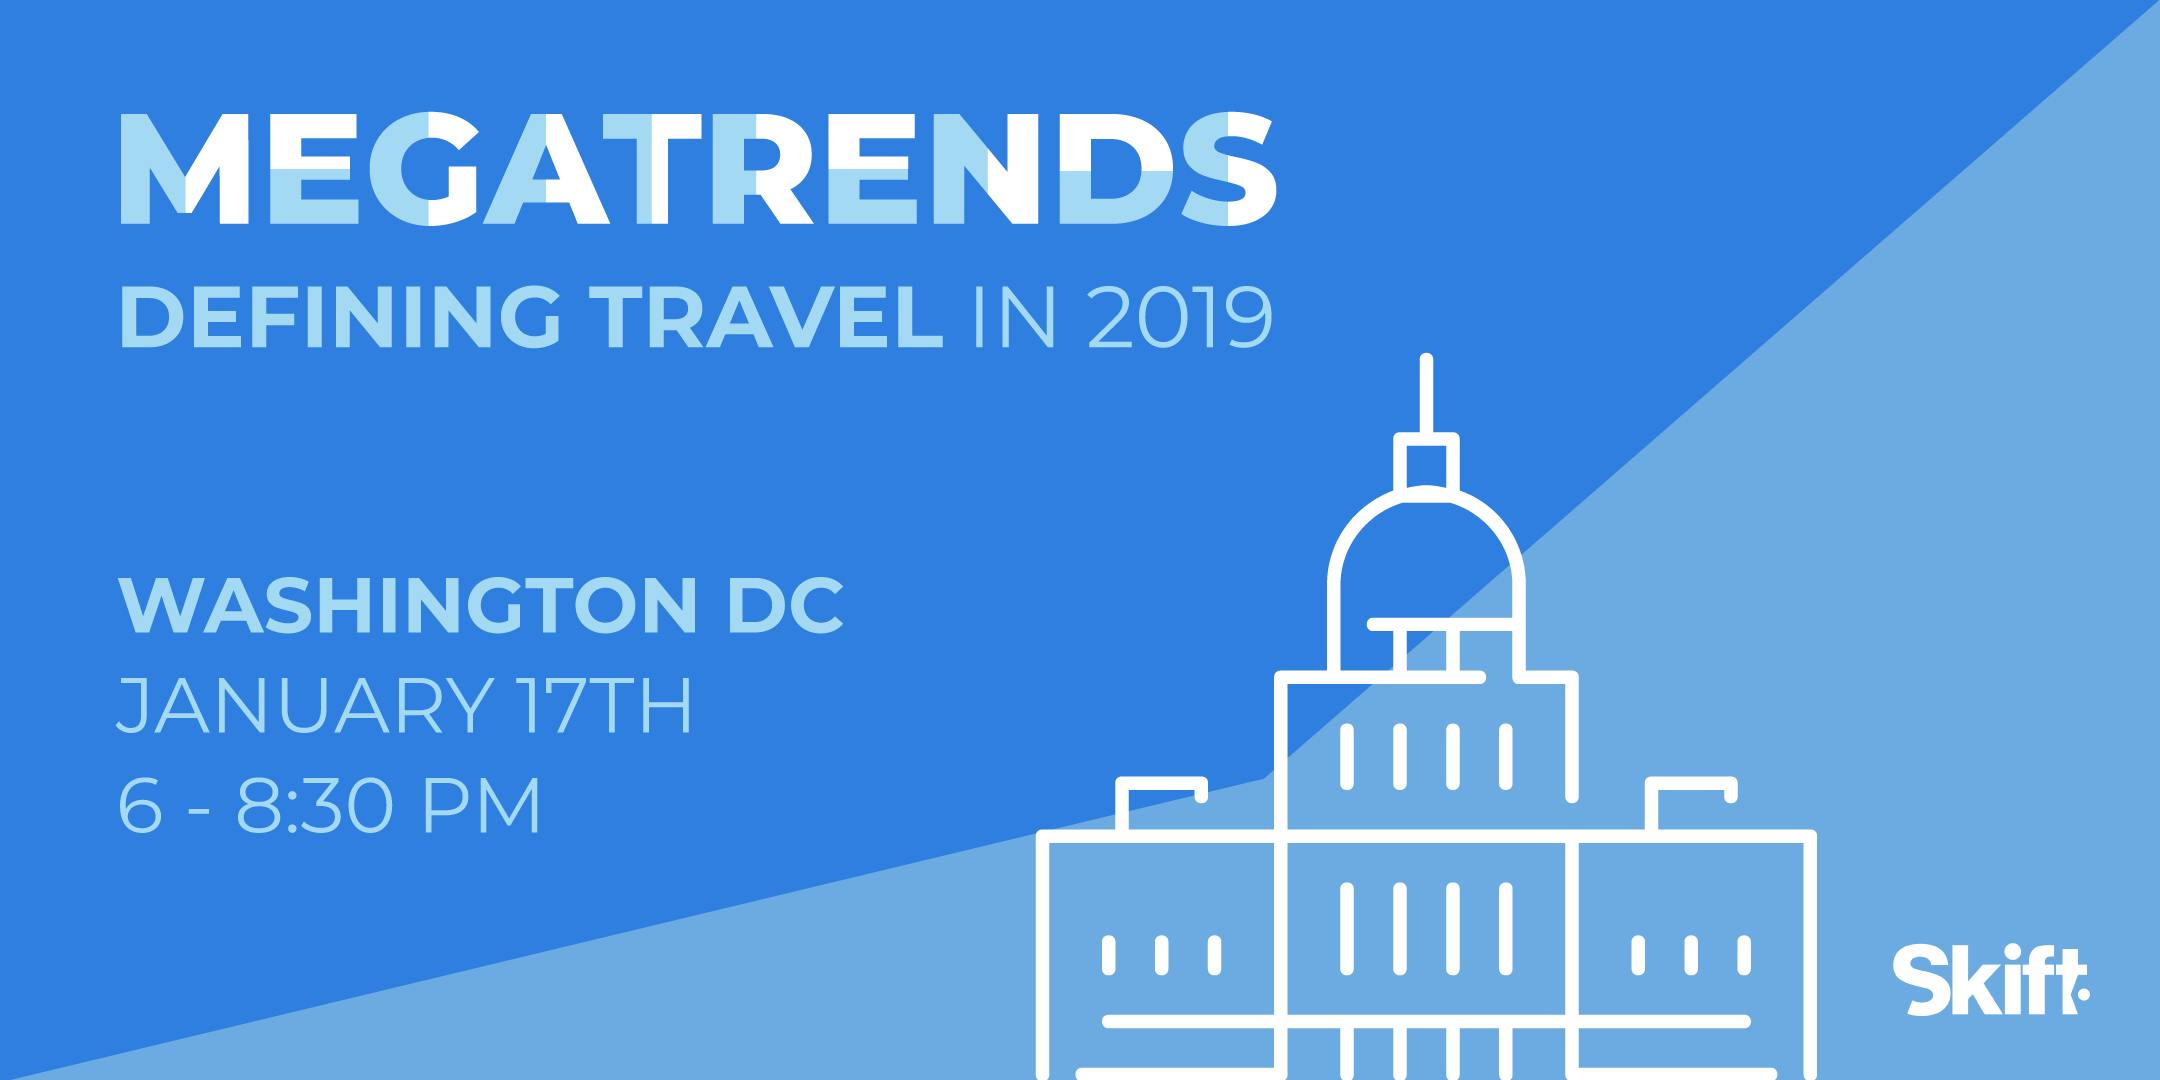 SOLD OUT: Skift's 2019 Travel Megatrends Forecast & Magazine Launch Event: WASHINGTON DC